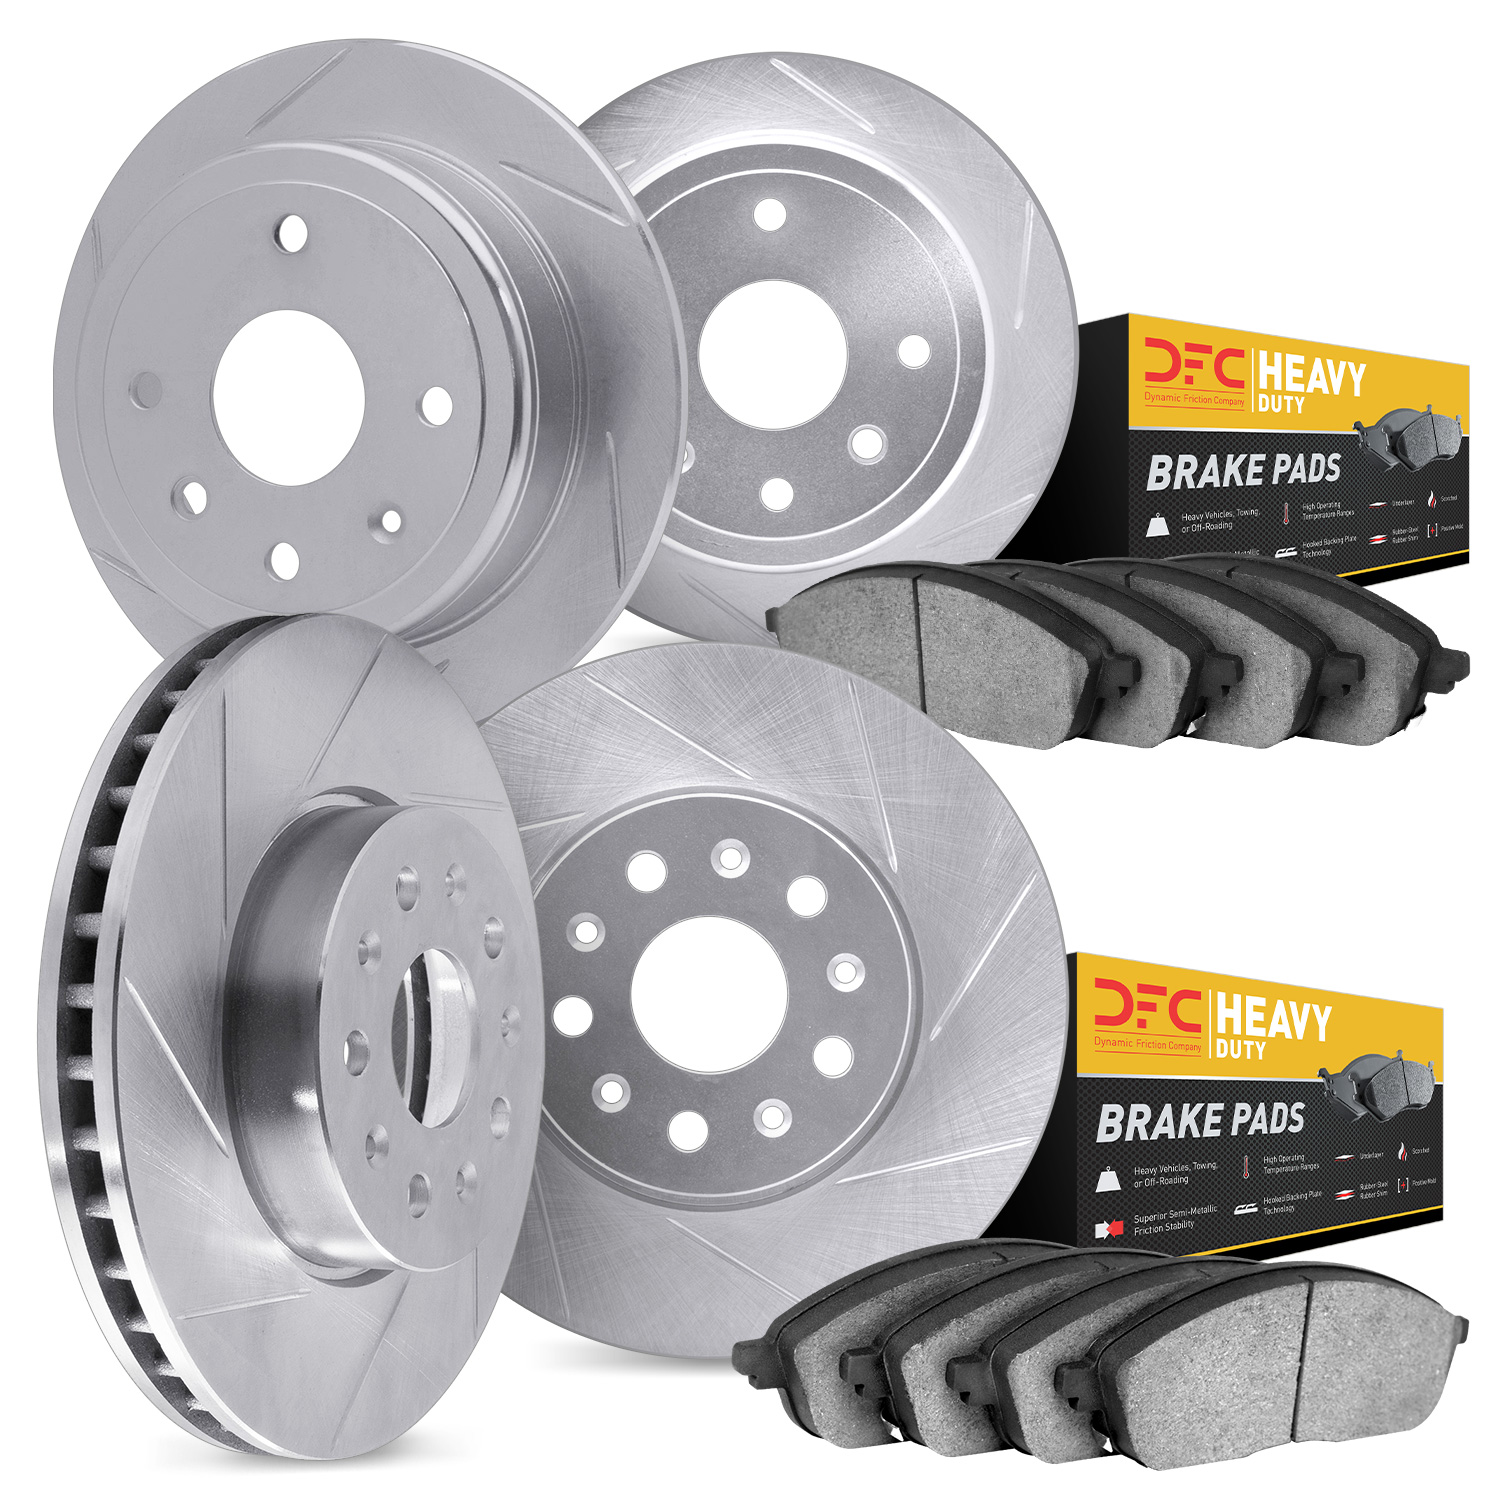 5204-42010 Slotted Brake Rotors w/Heavy-Duty Brake Pads Kits [Silver], Fits Select Mopar, Position: Front and Rear